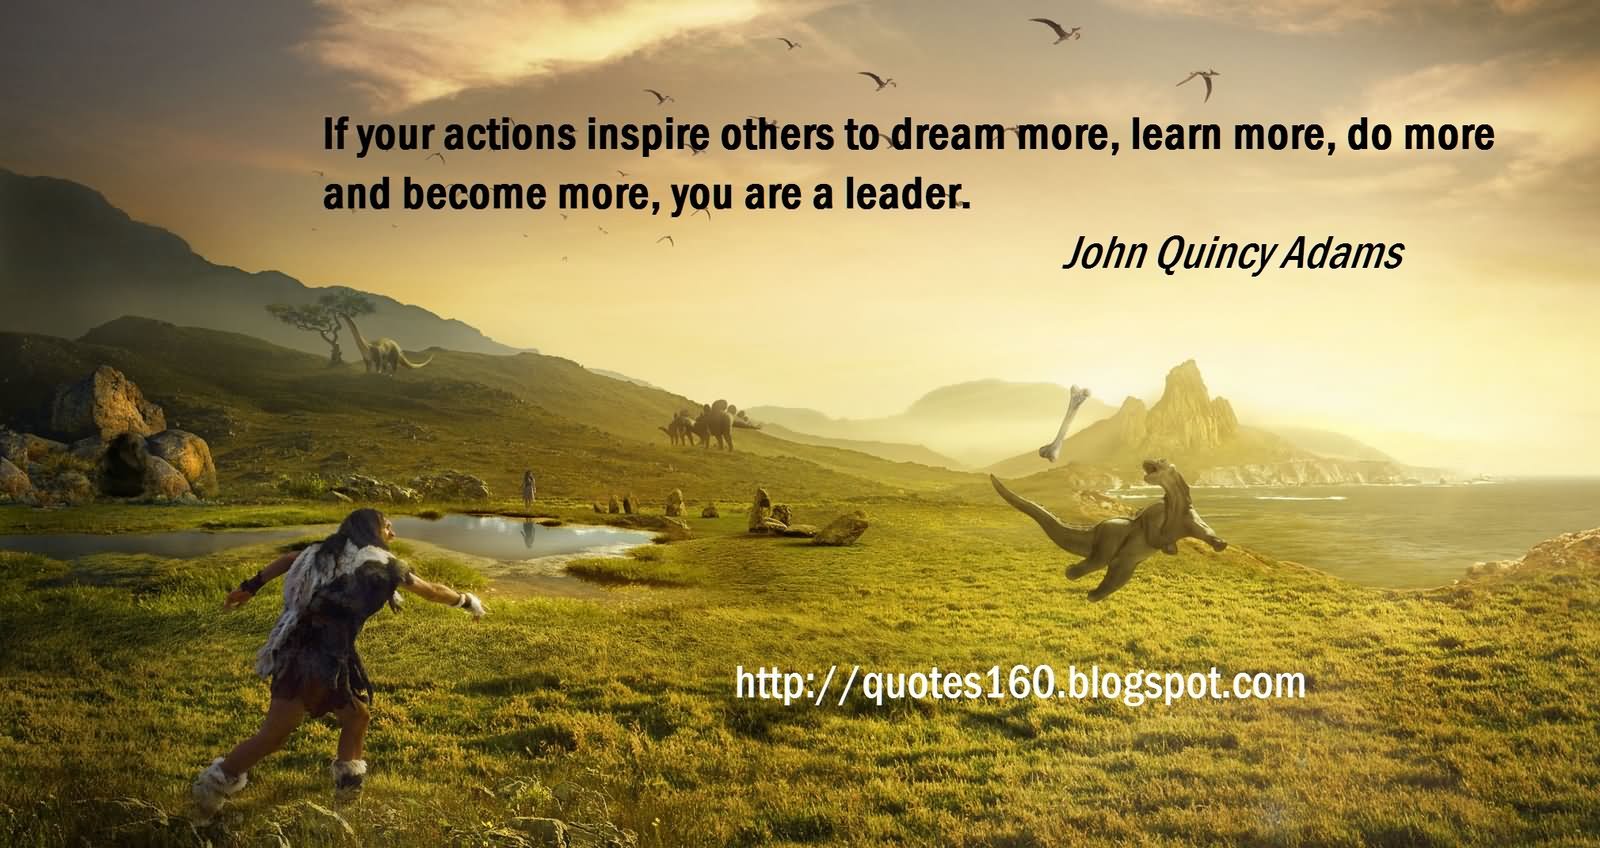 If your actions inspire others to dream more, learn more, do more and become more, you are a leader. - John Quincy Adams